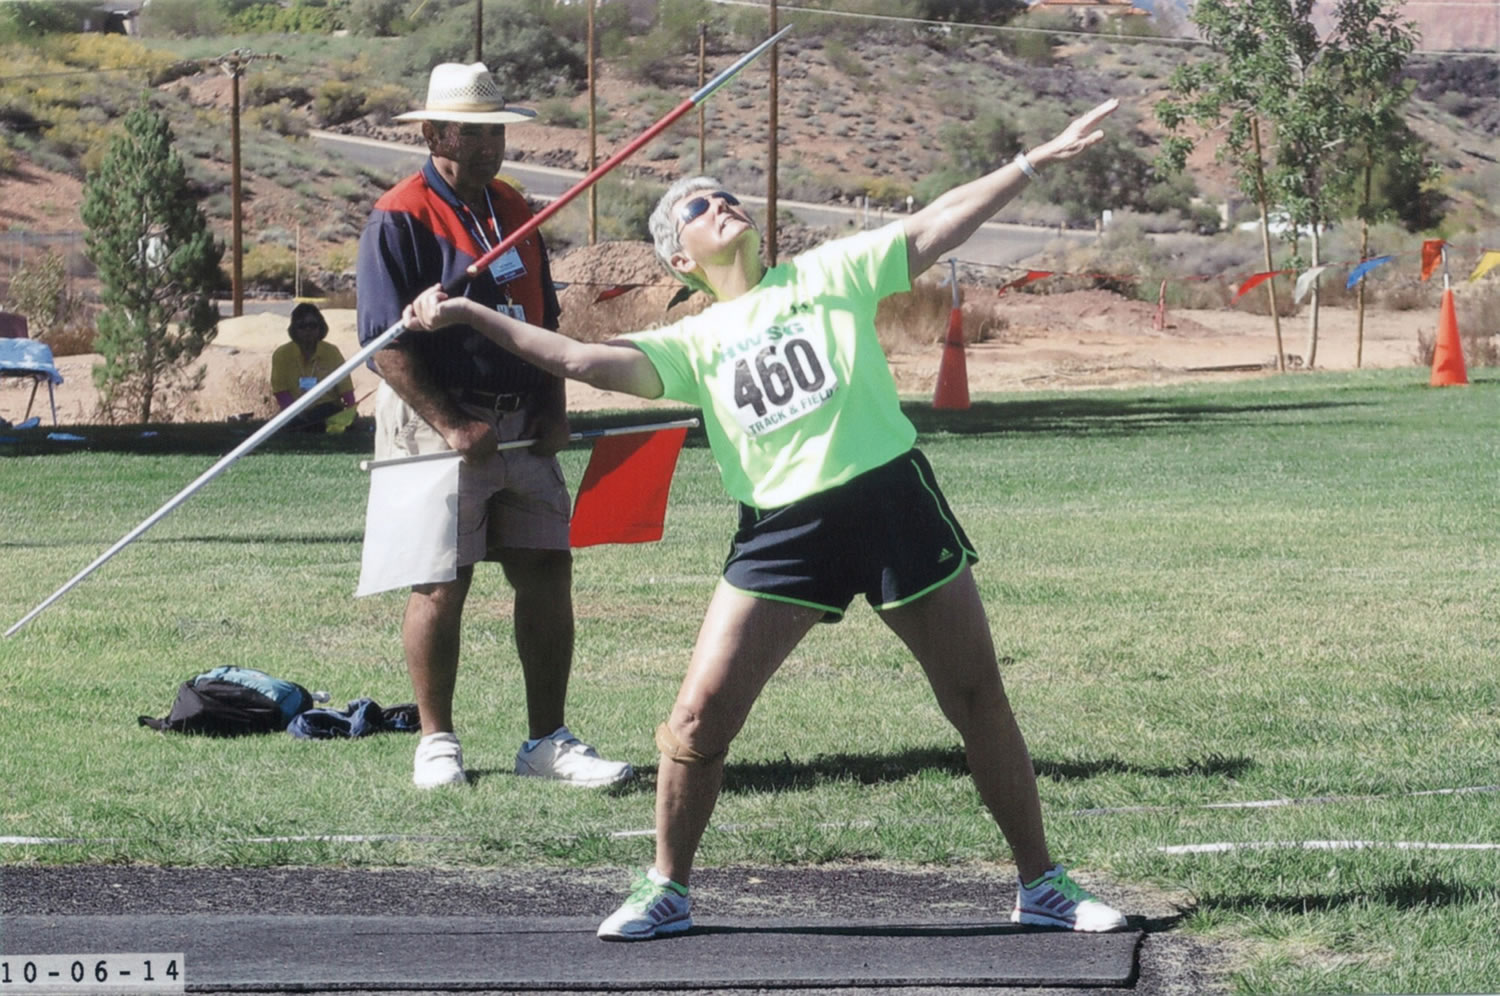 Janice Bradley of Battle Ground set a personal record in the javelin at the Huntsman World Senior Games on Oct. 6.